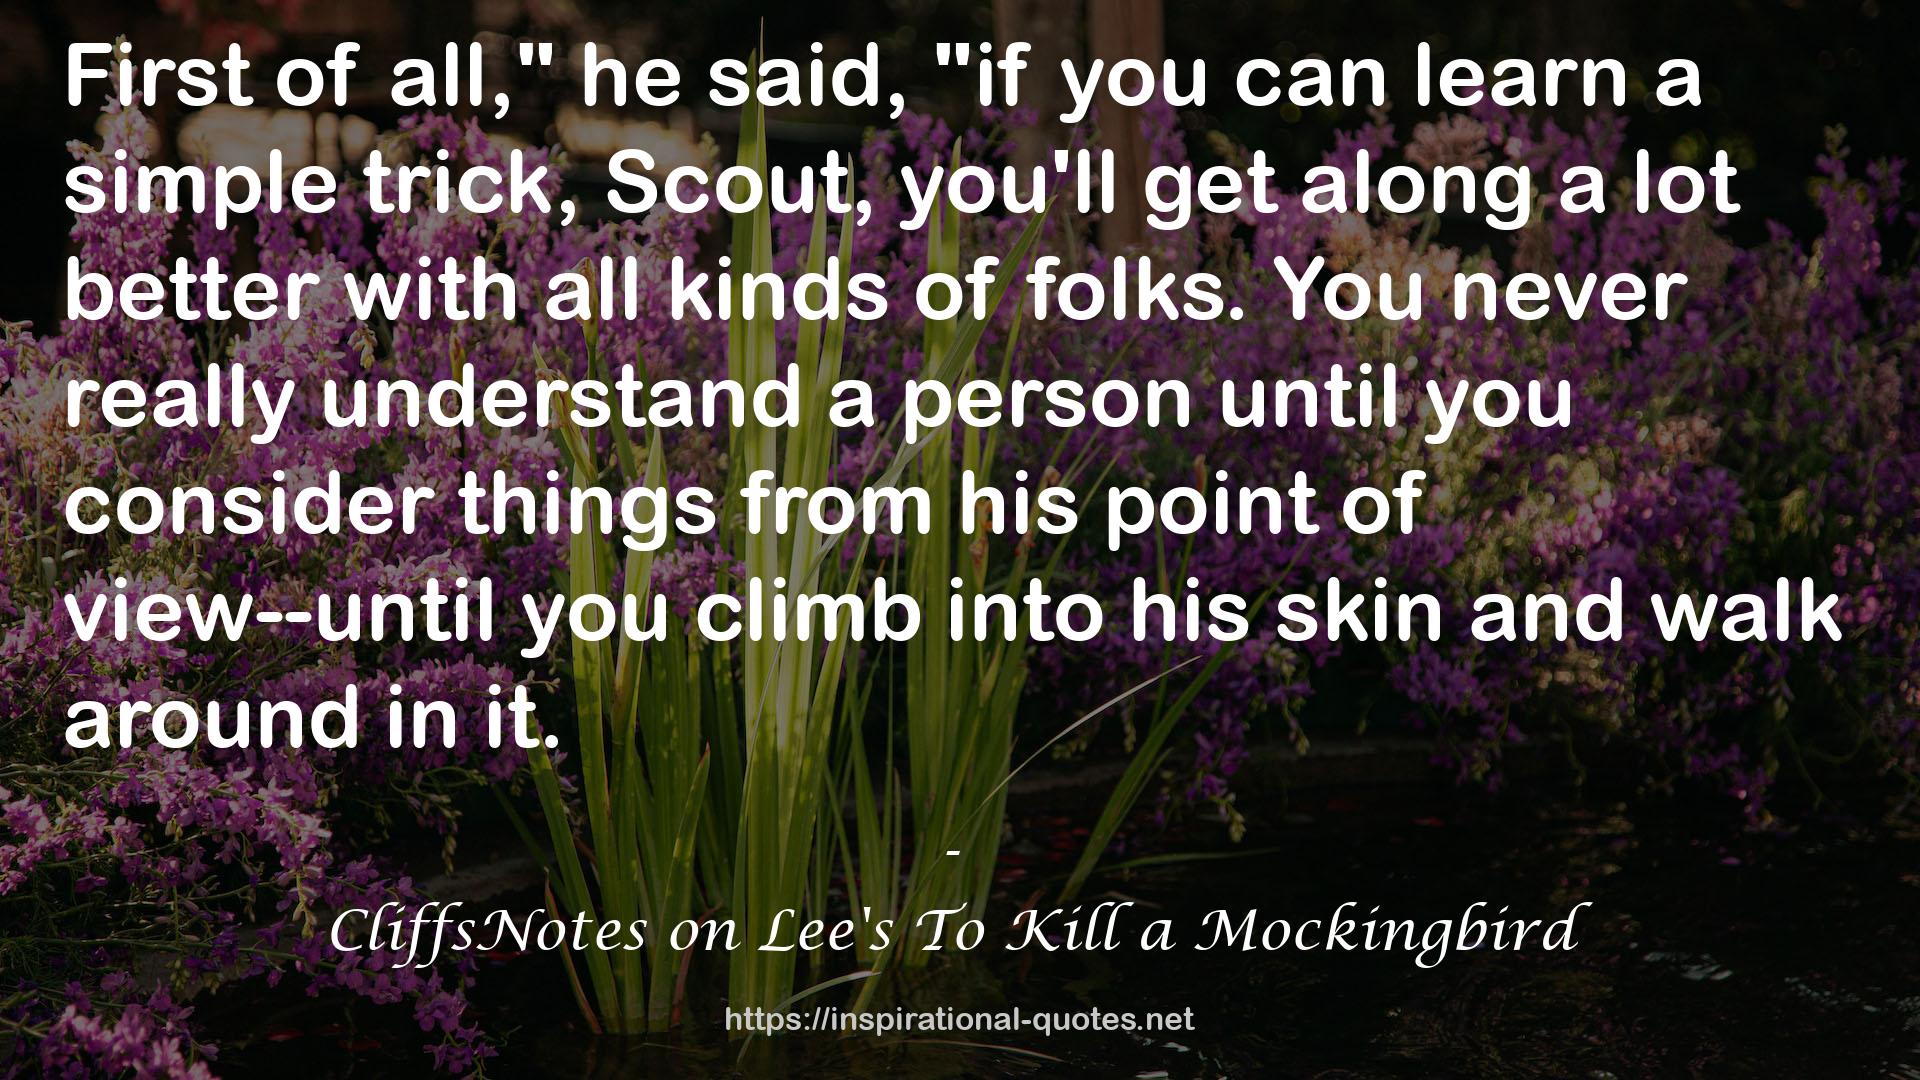 CliffsNotes on Lee's To Kill a Mockingbird QUOTES